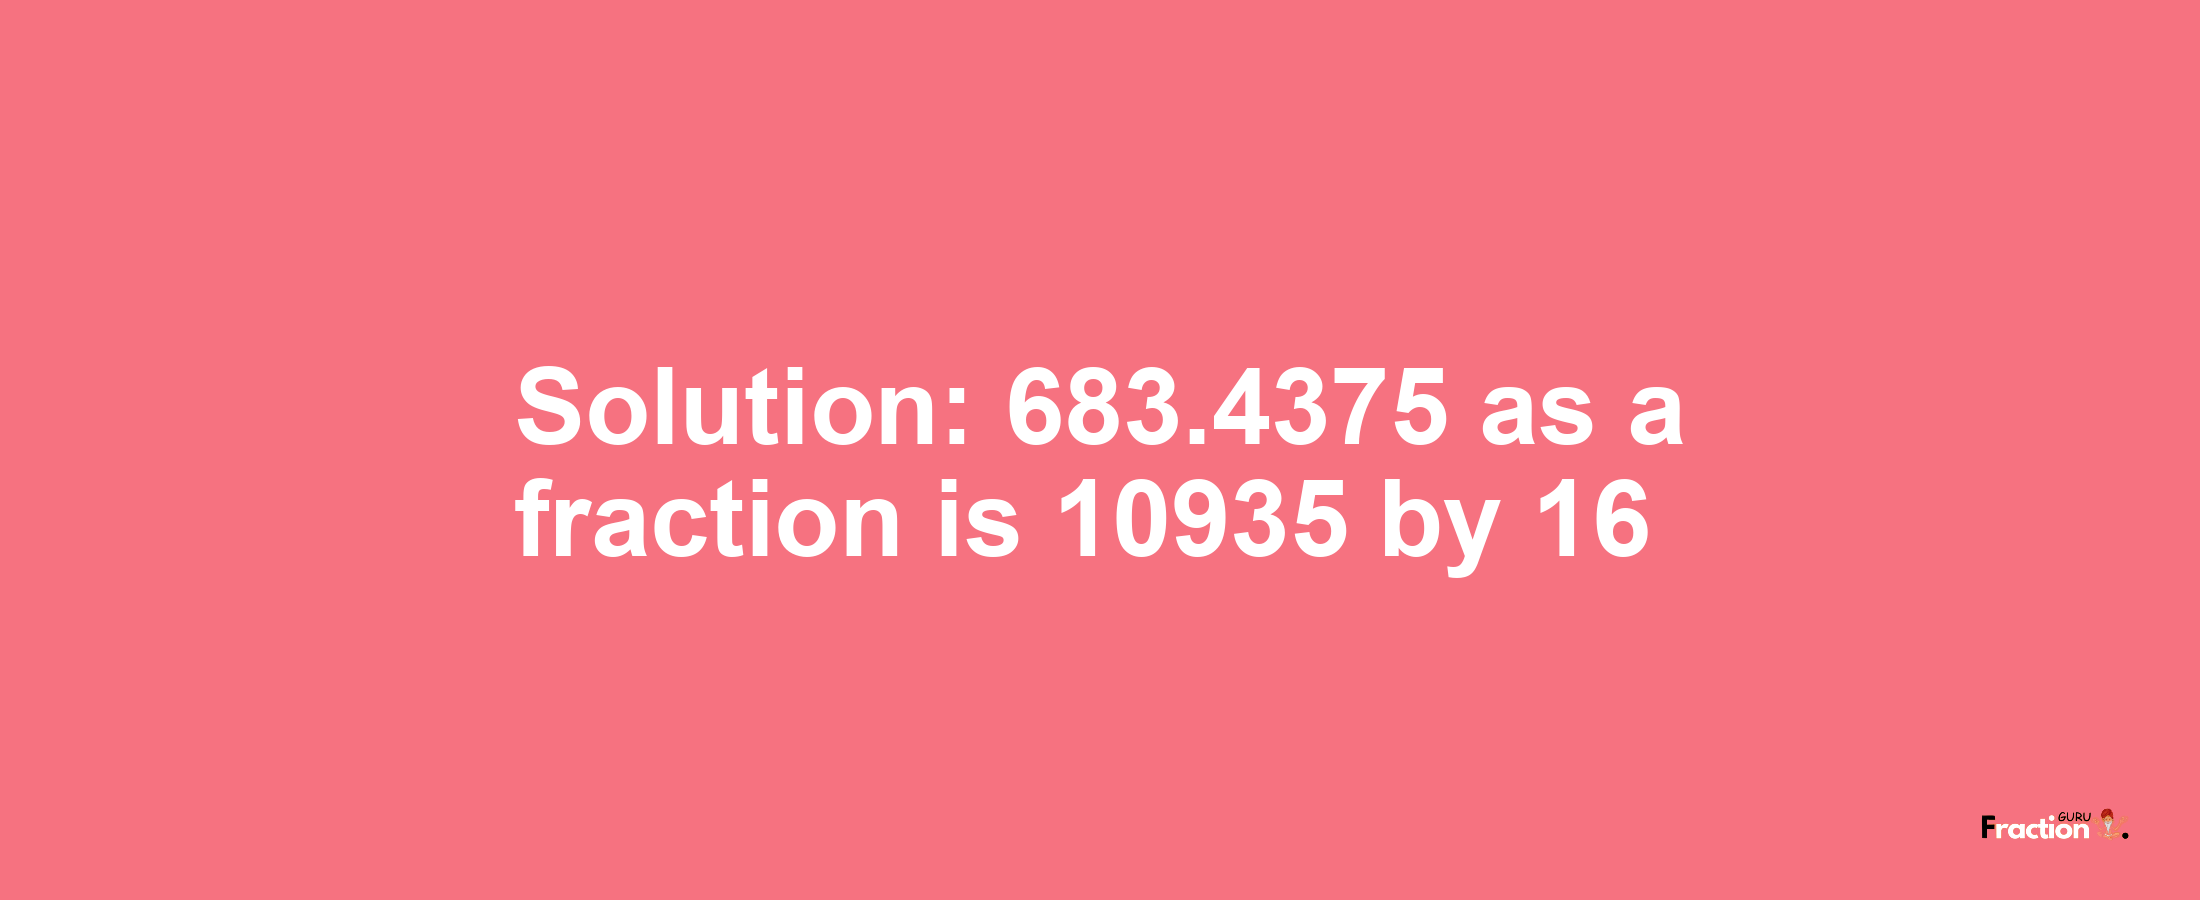 Solution:683.4375 as a fraction is 10935/16